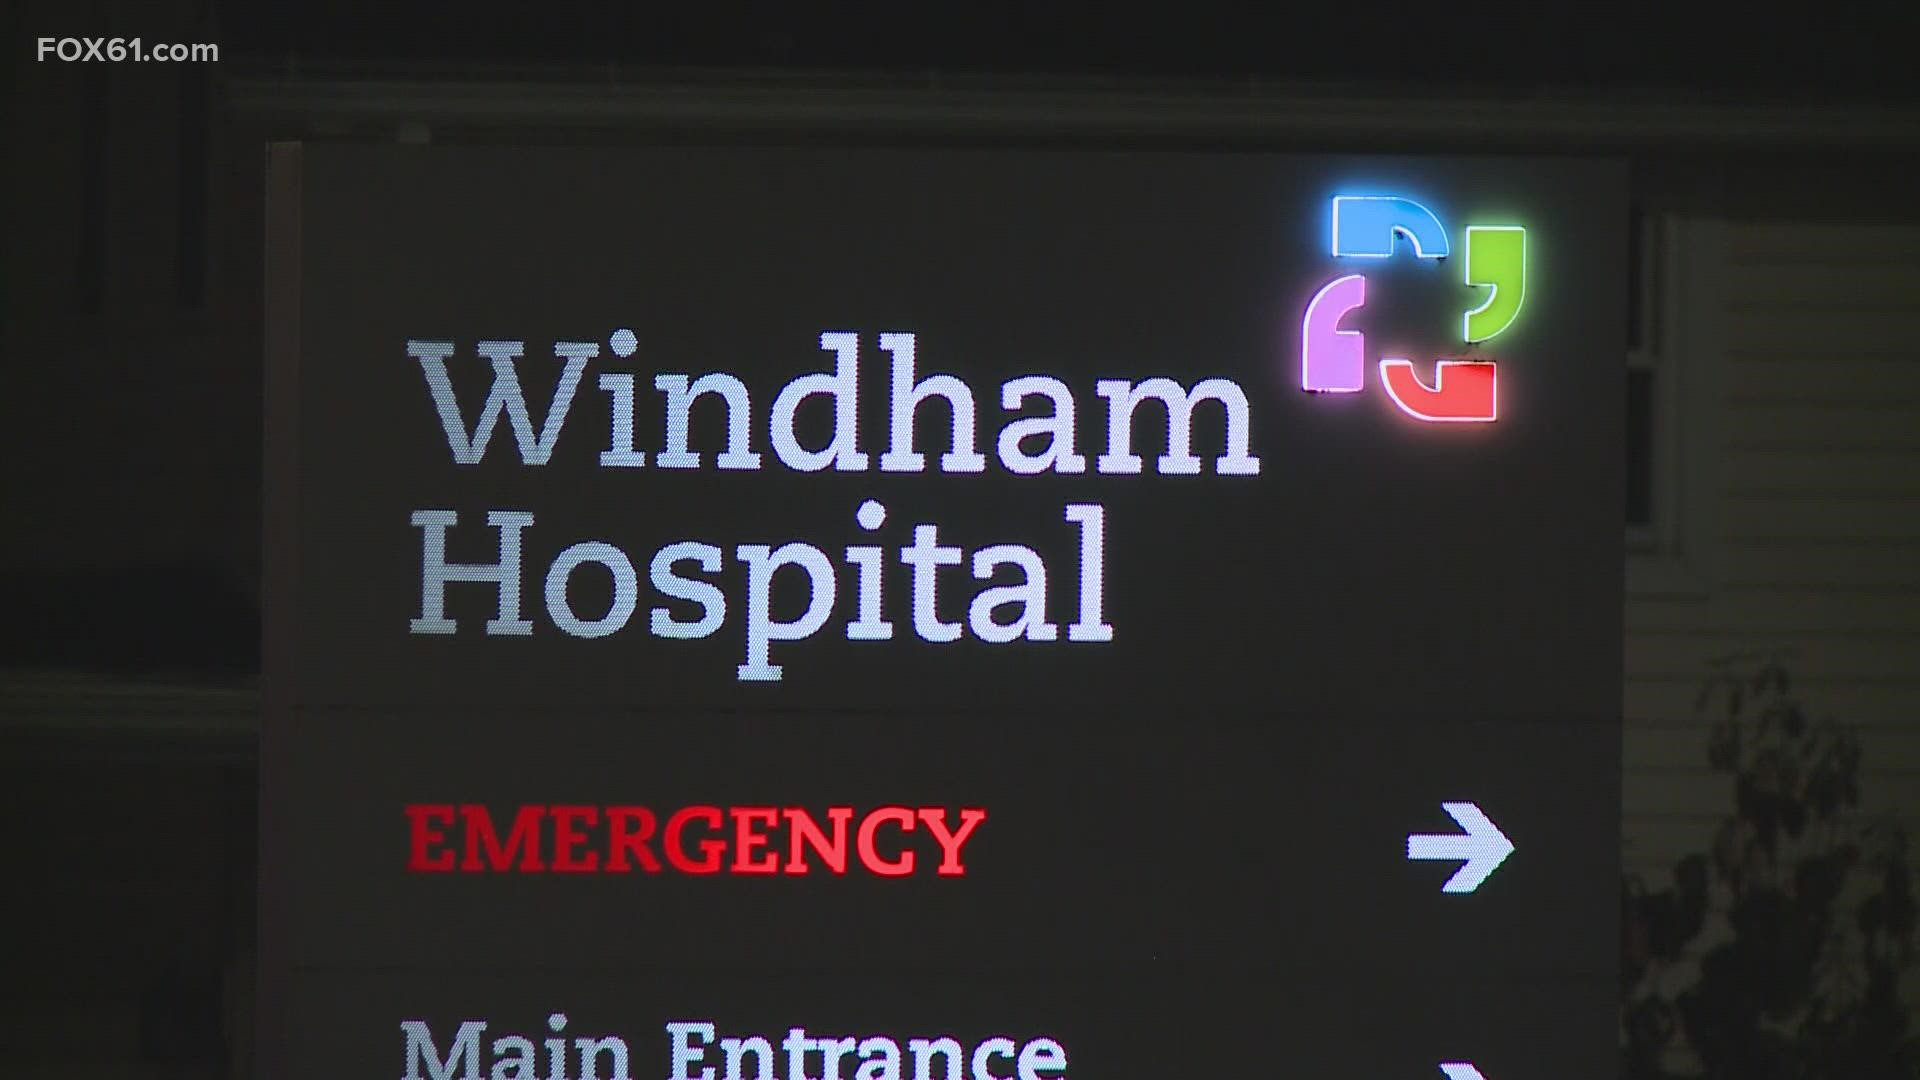 Windham Hospital is seeking to officially close its maternity ward, citing low birth rates as one of the many reasons. Residents are pushing back on this move.